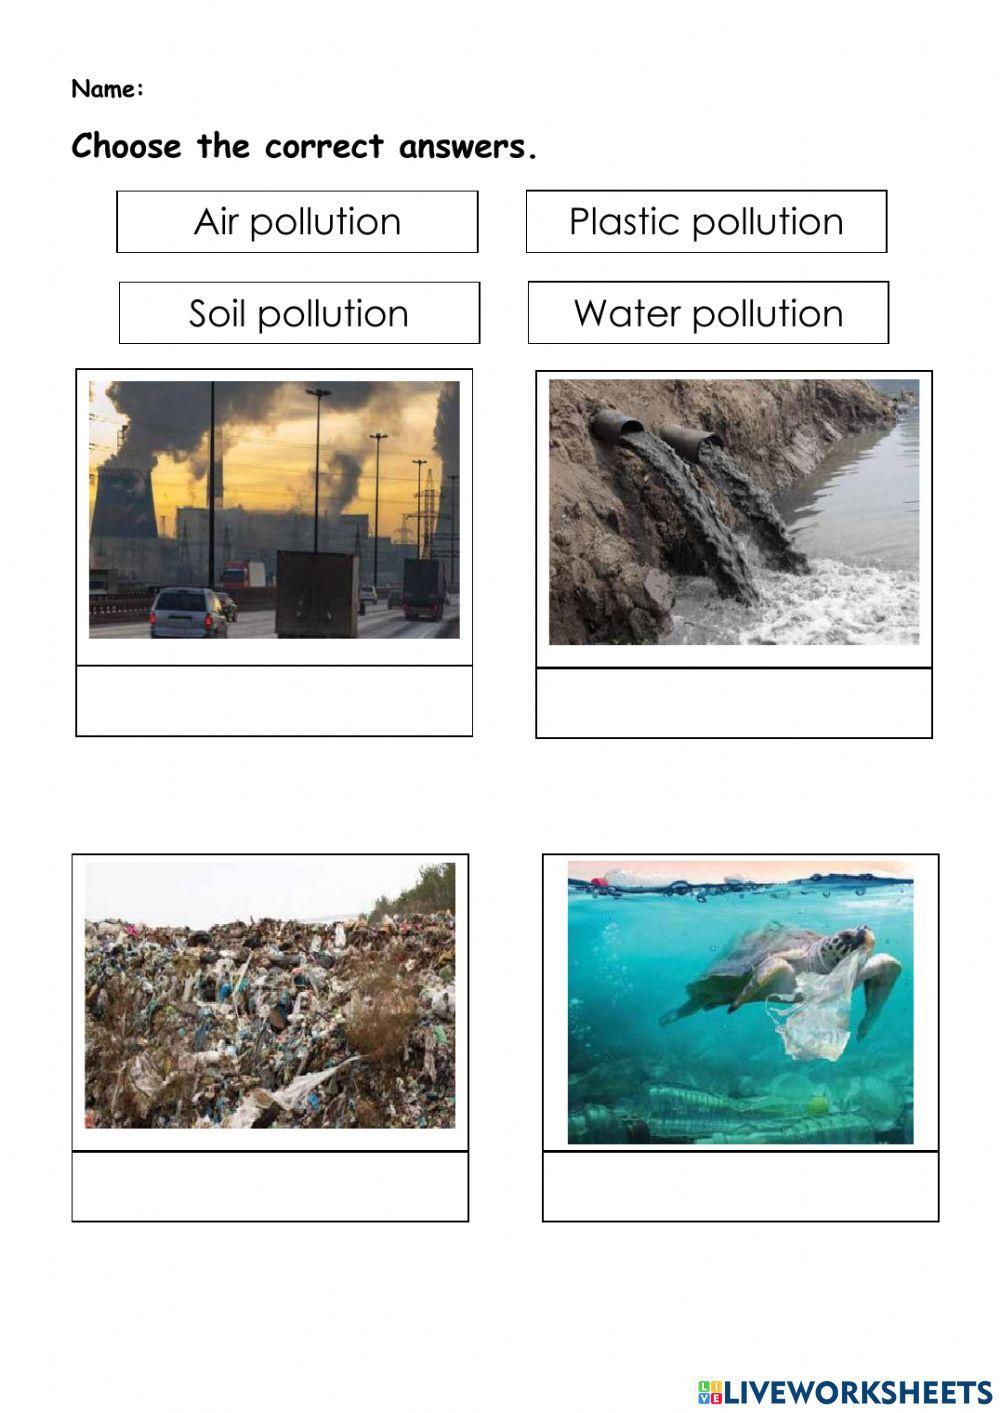 Types of pollution